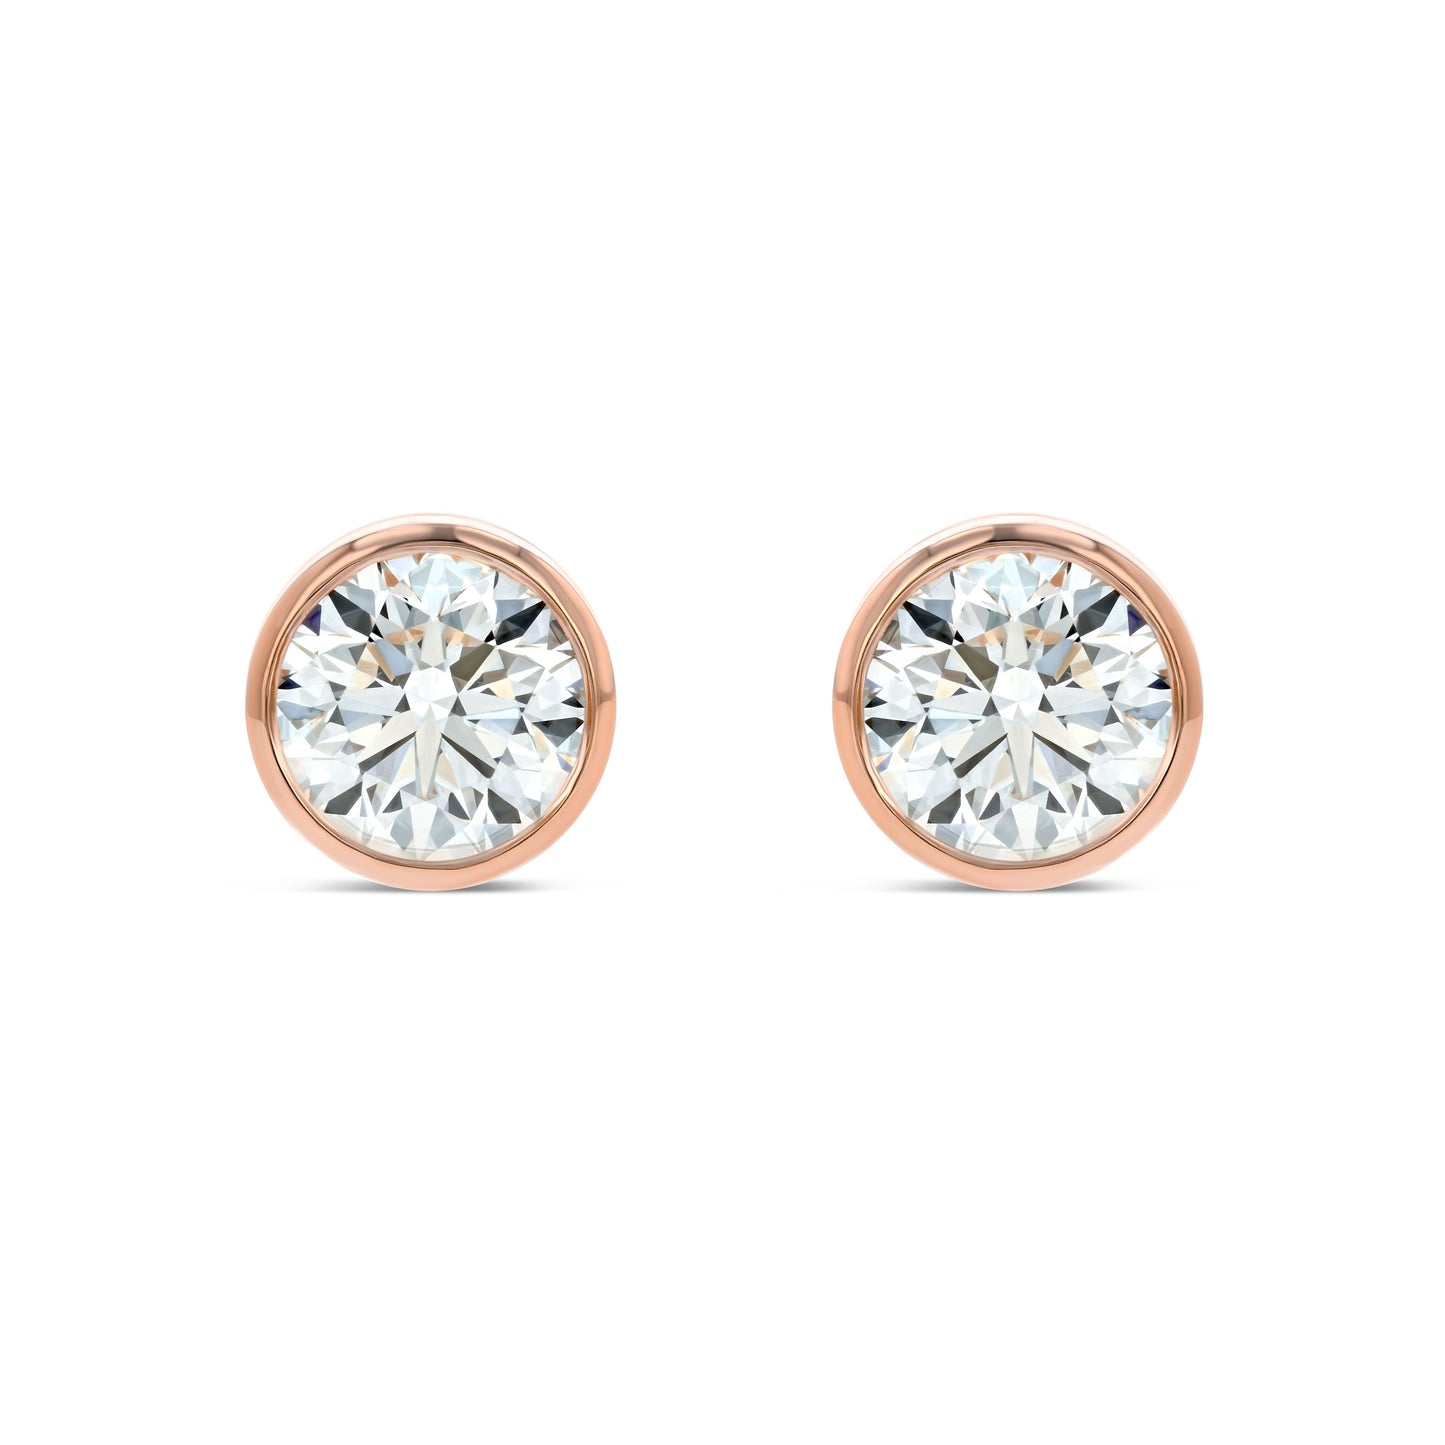 14k Rose Gold Bezel Round Diamond Stud Earrings 1ctw (5.2mm Ea), H Color, Si3-i1 Clarity